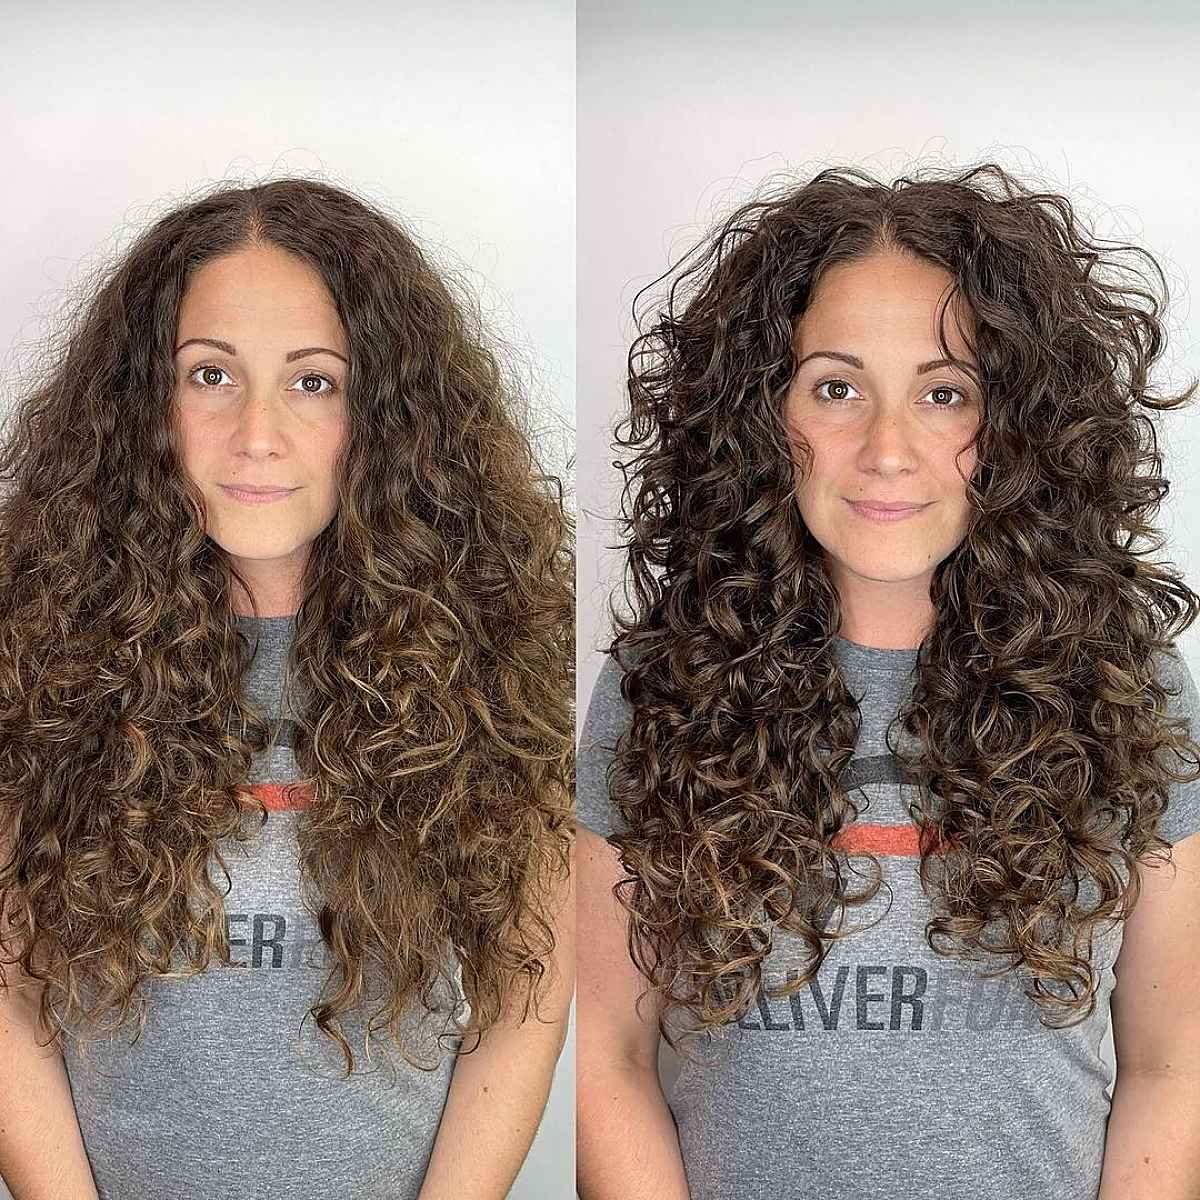 Curly Shaggy Cut for Women Over 40